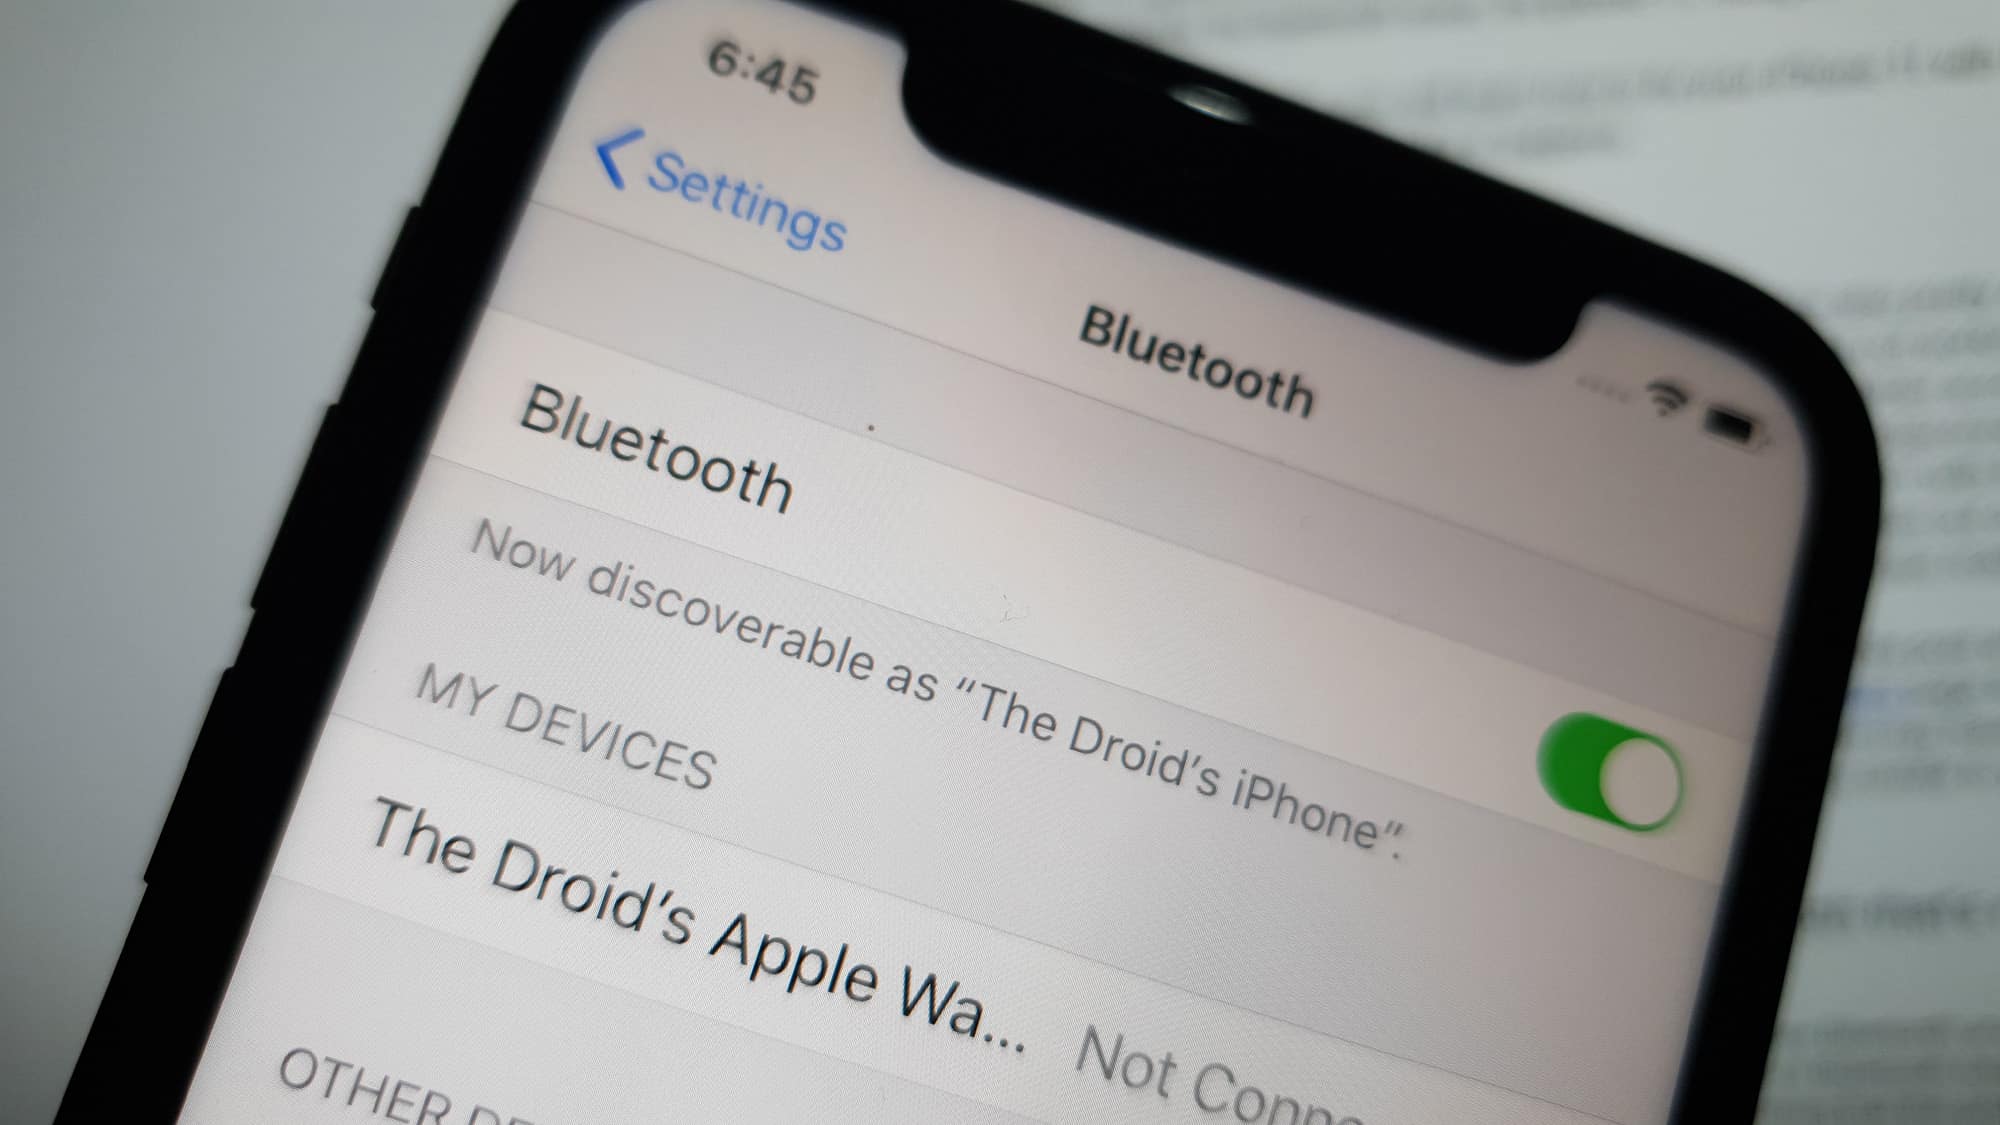 How To Change Bluetooth Name on iPhone